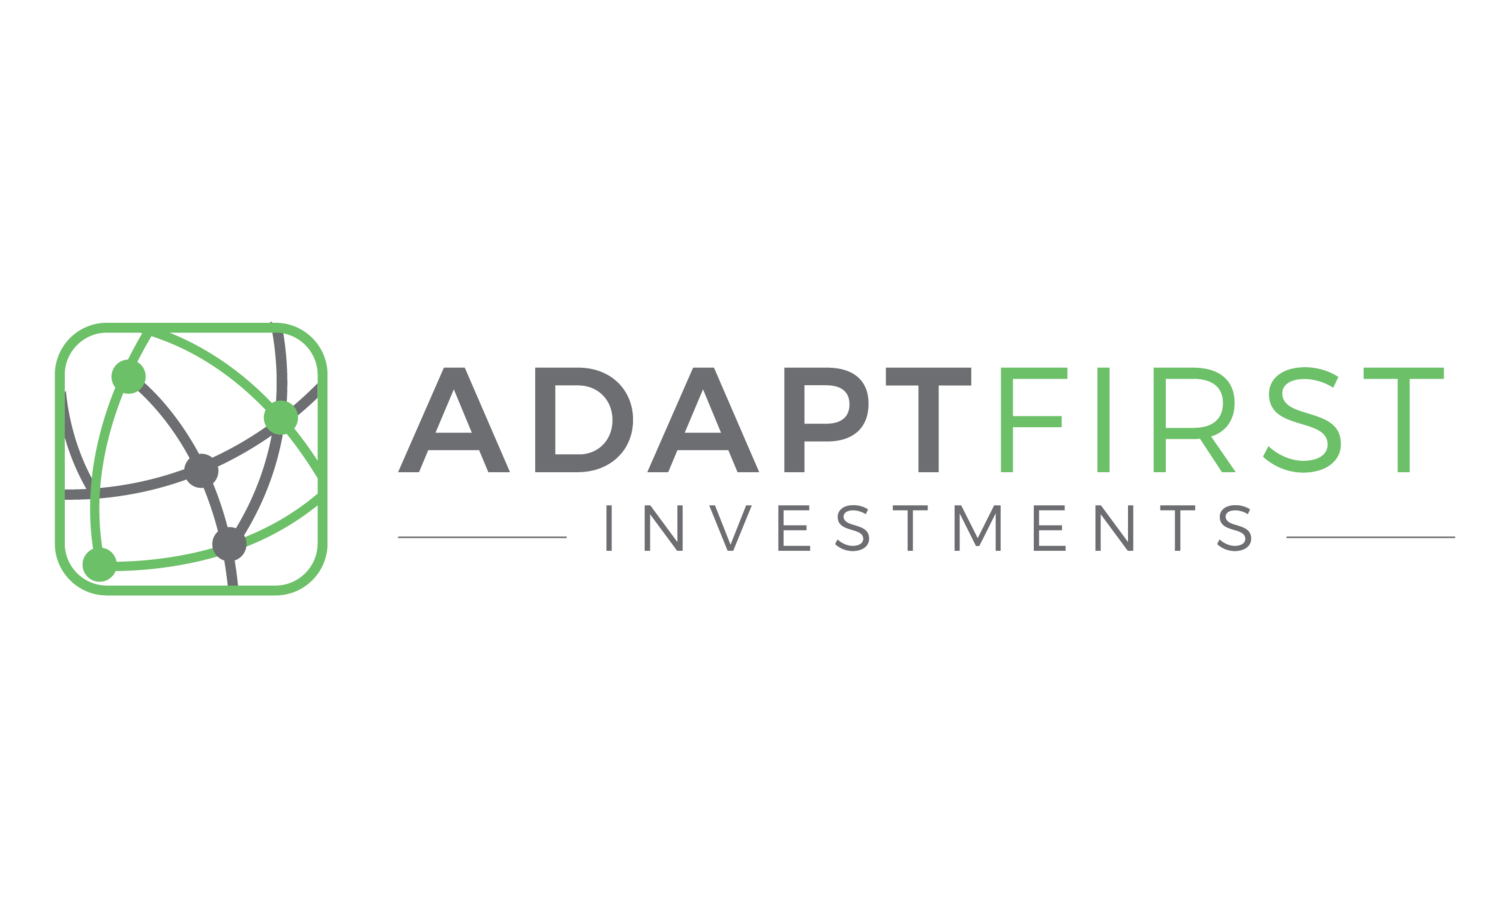 AdaptFirst Investments - Financial Advisor Planner Independent Entrepreneur Fee-only Fiduciary